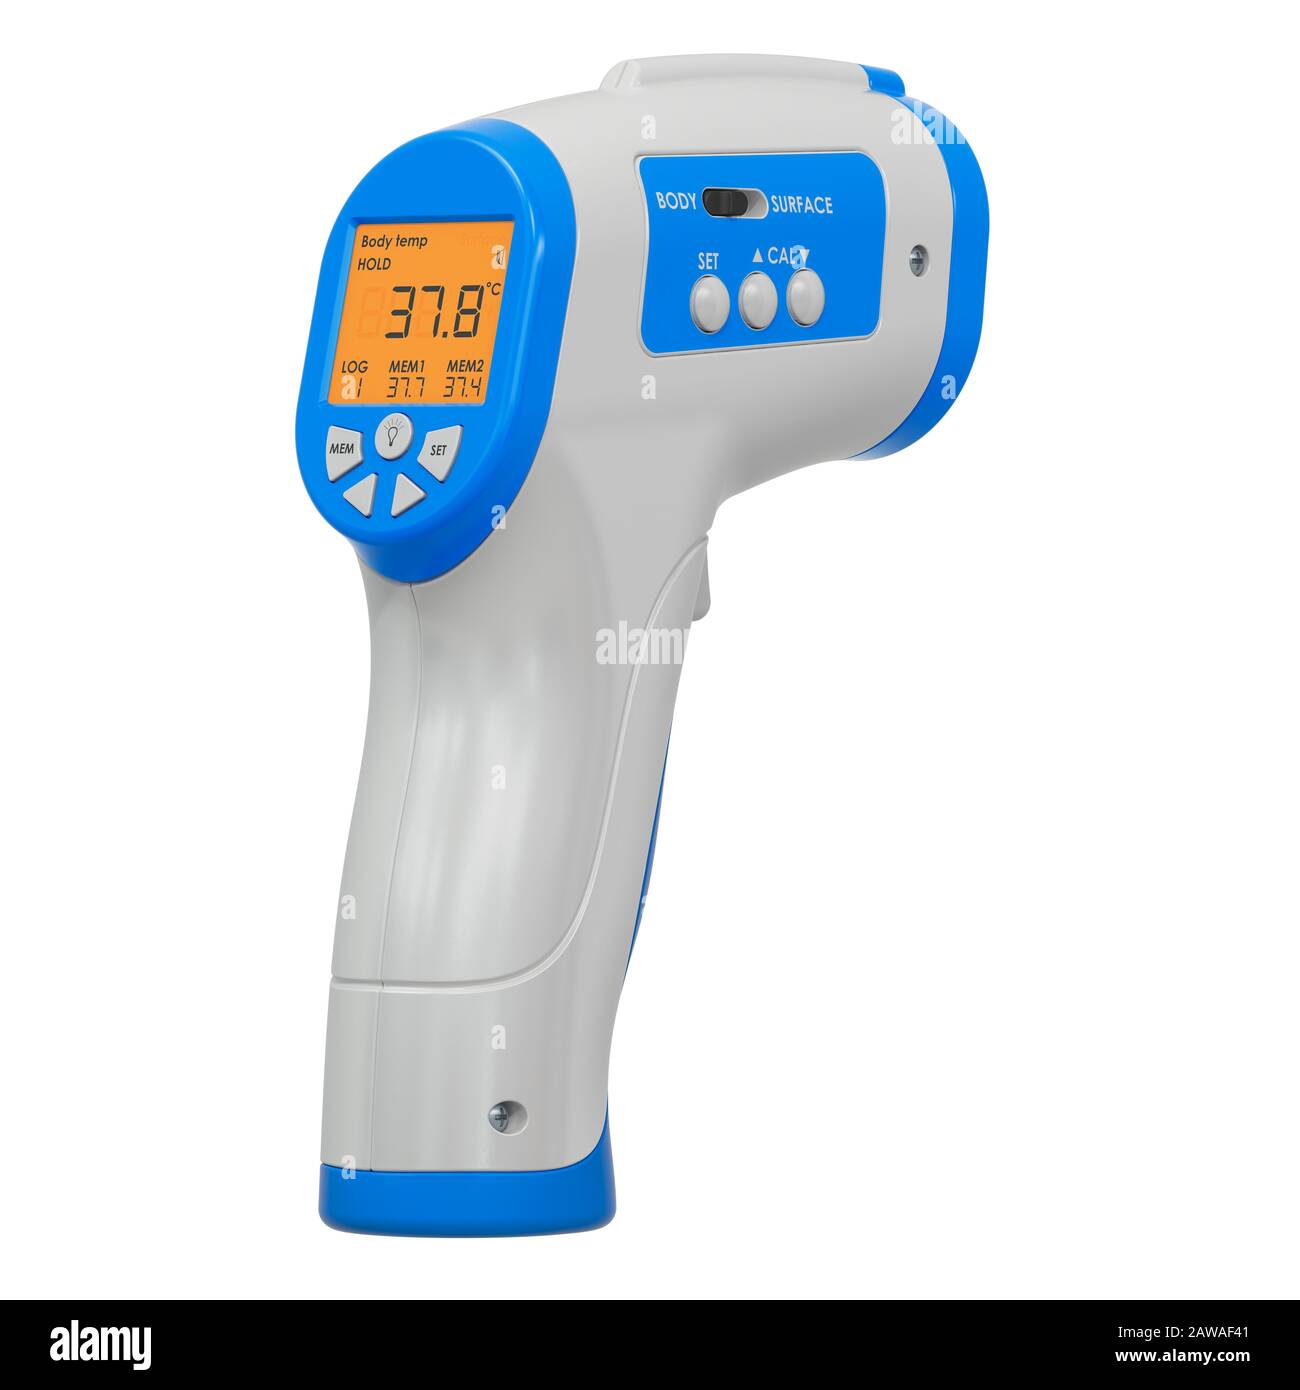 https://c8.alamy.com/comp/2AWAF41/digital-non-contact-forehead-thermometer-laser-3d-rendering-isolated-on-white-background-2AWAF41.jpg